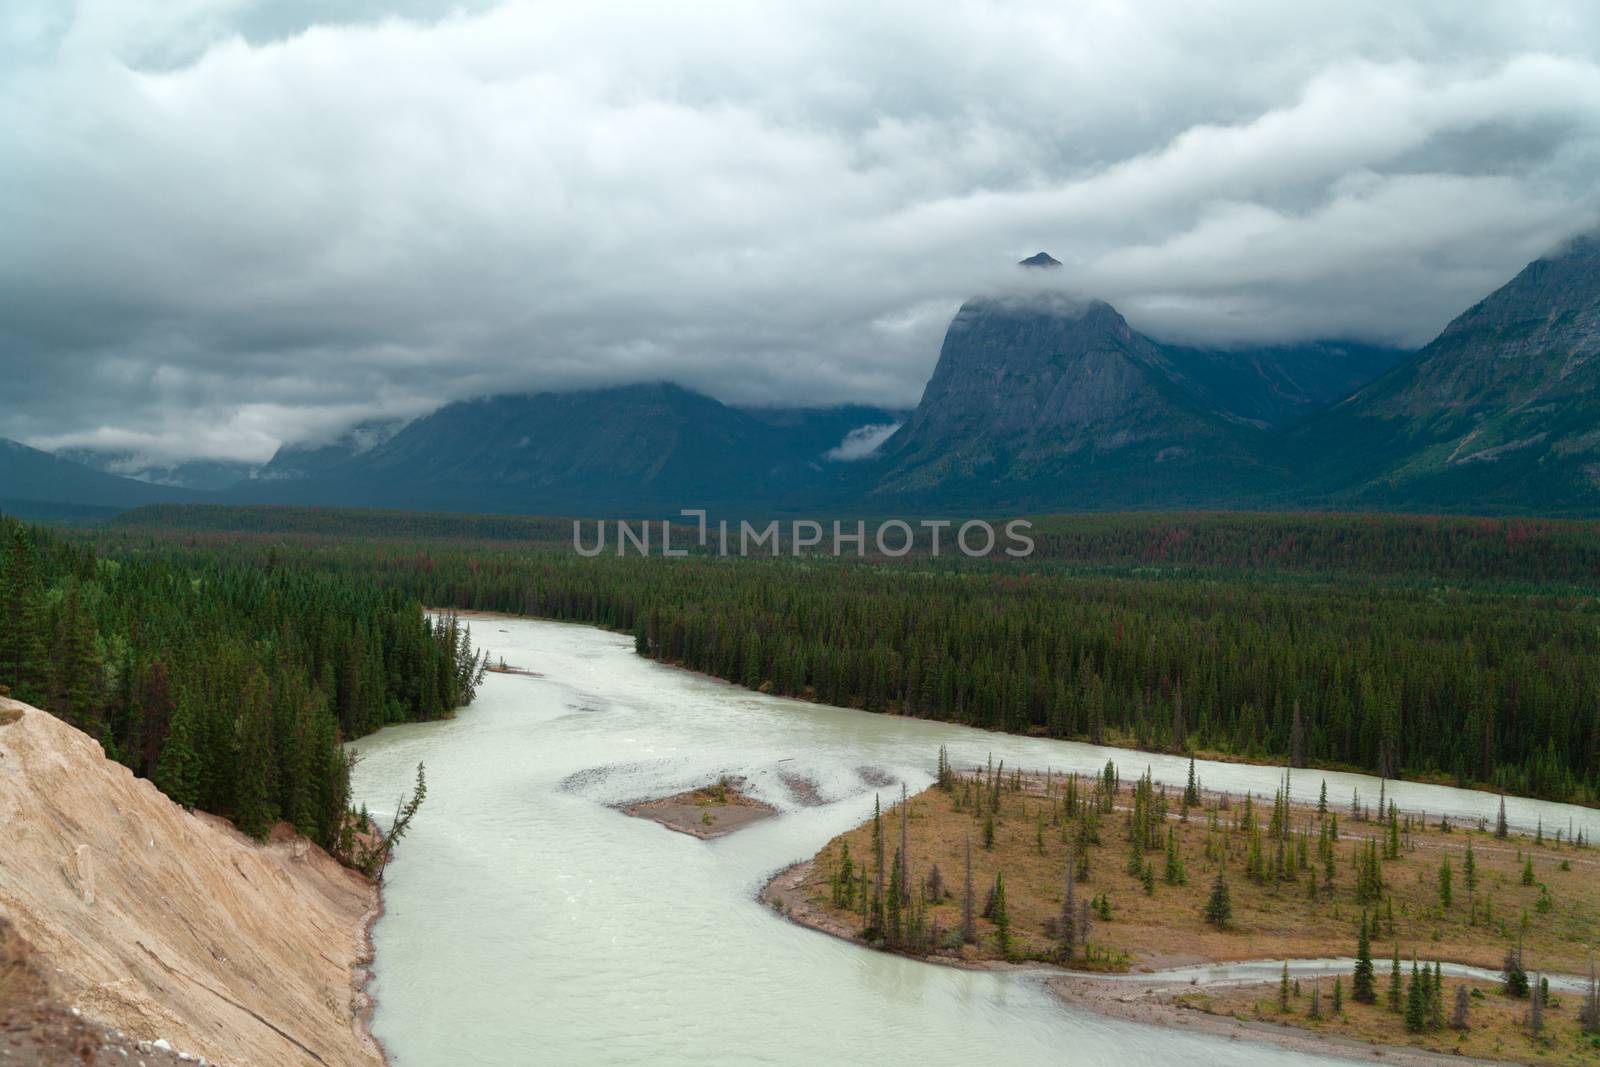 Athabasca River and mountains in the Hooker Icefield Range, including Brussels Peak, Mount Christie, Mount Fryatt, Canadian Rockies, Alberta, Canada